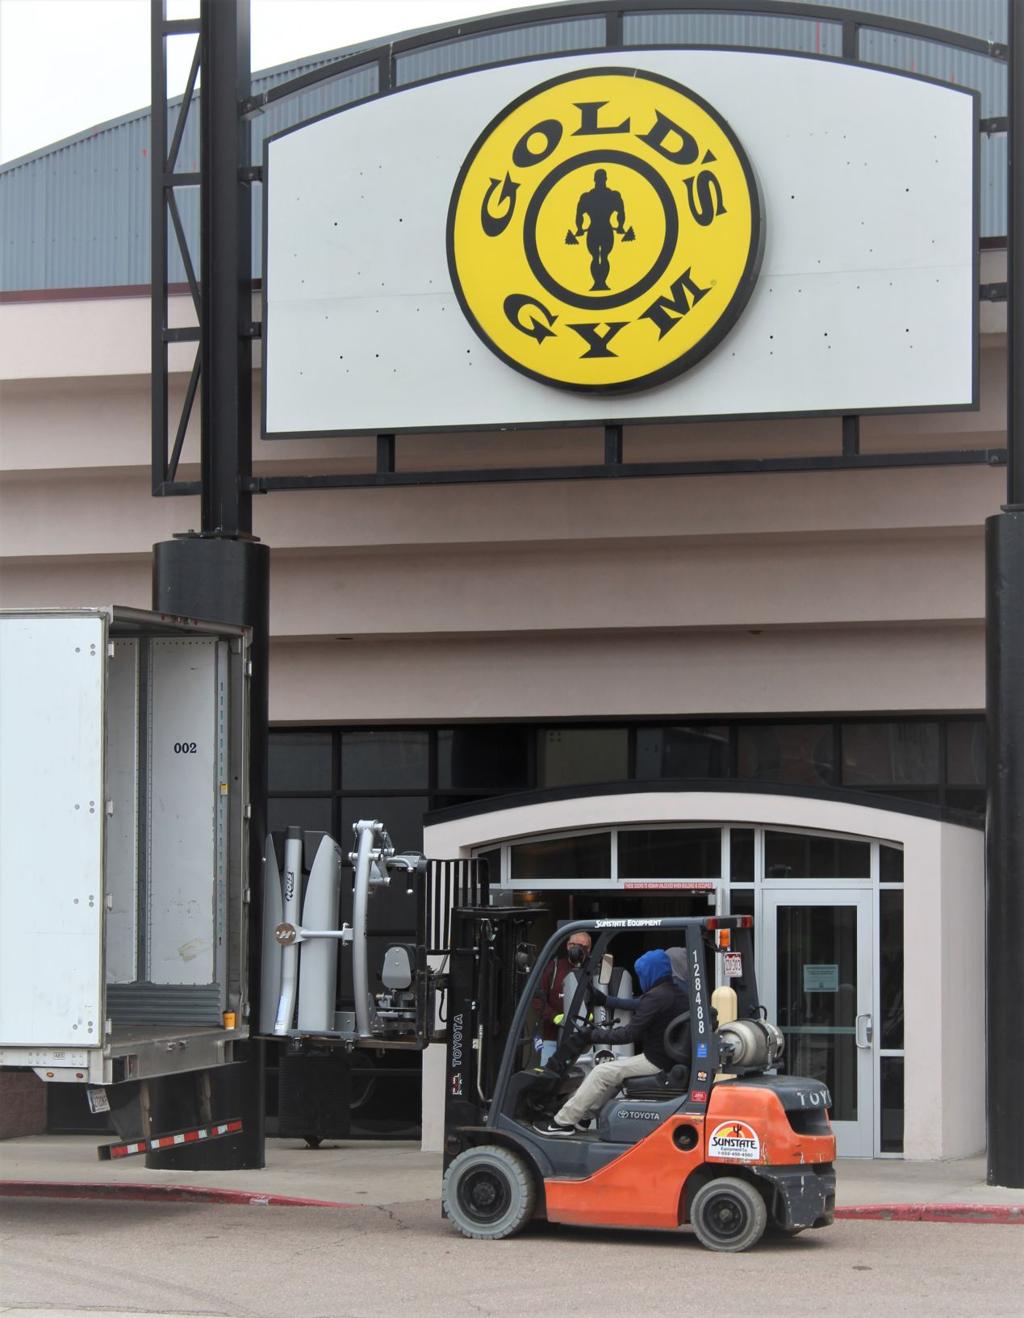 COVID-19 closures: Gold's Gym closes 30 locations due to coronavirus